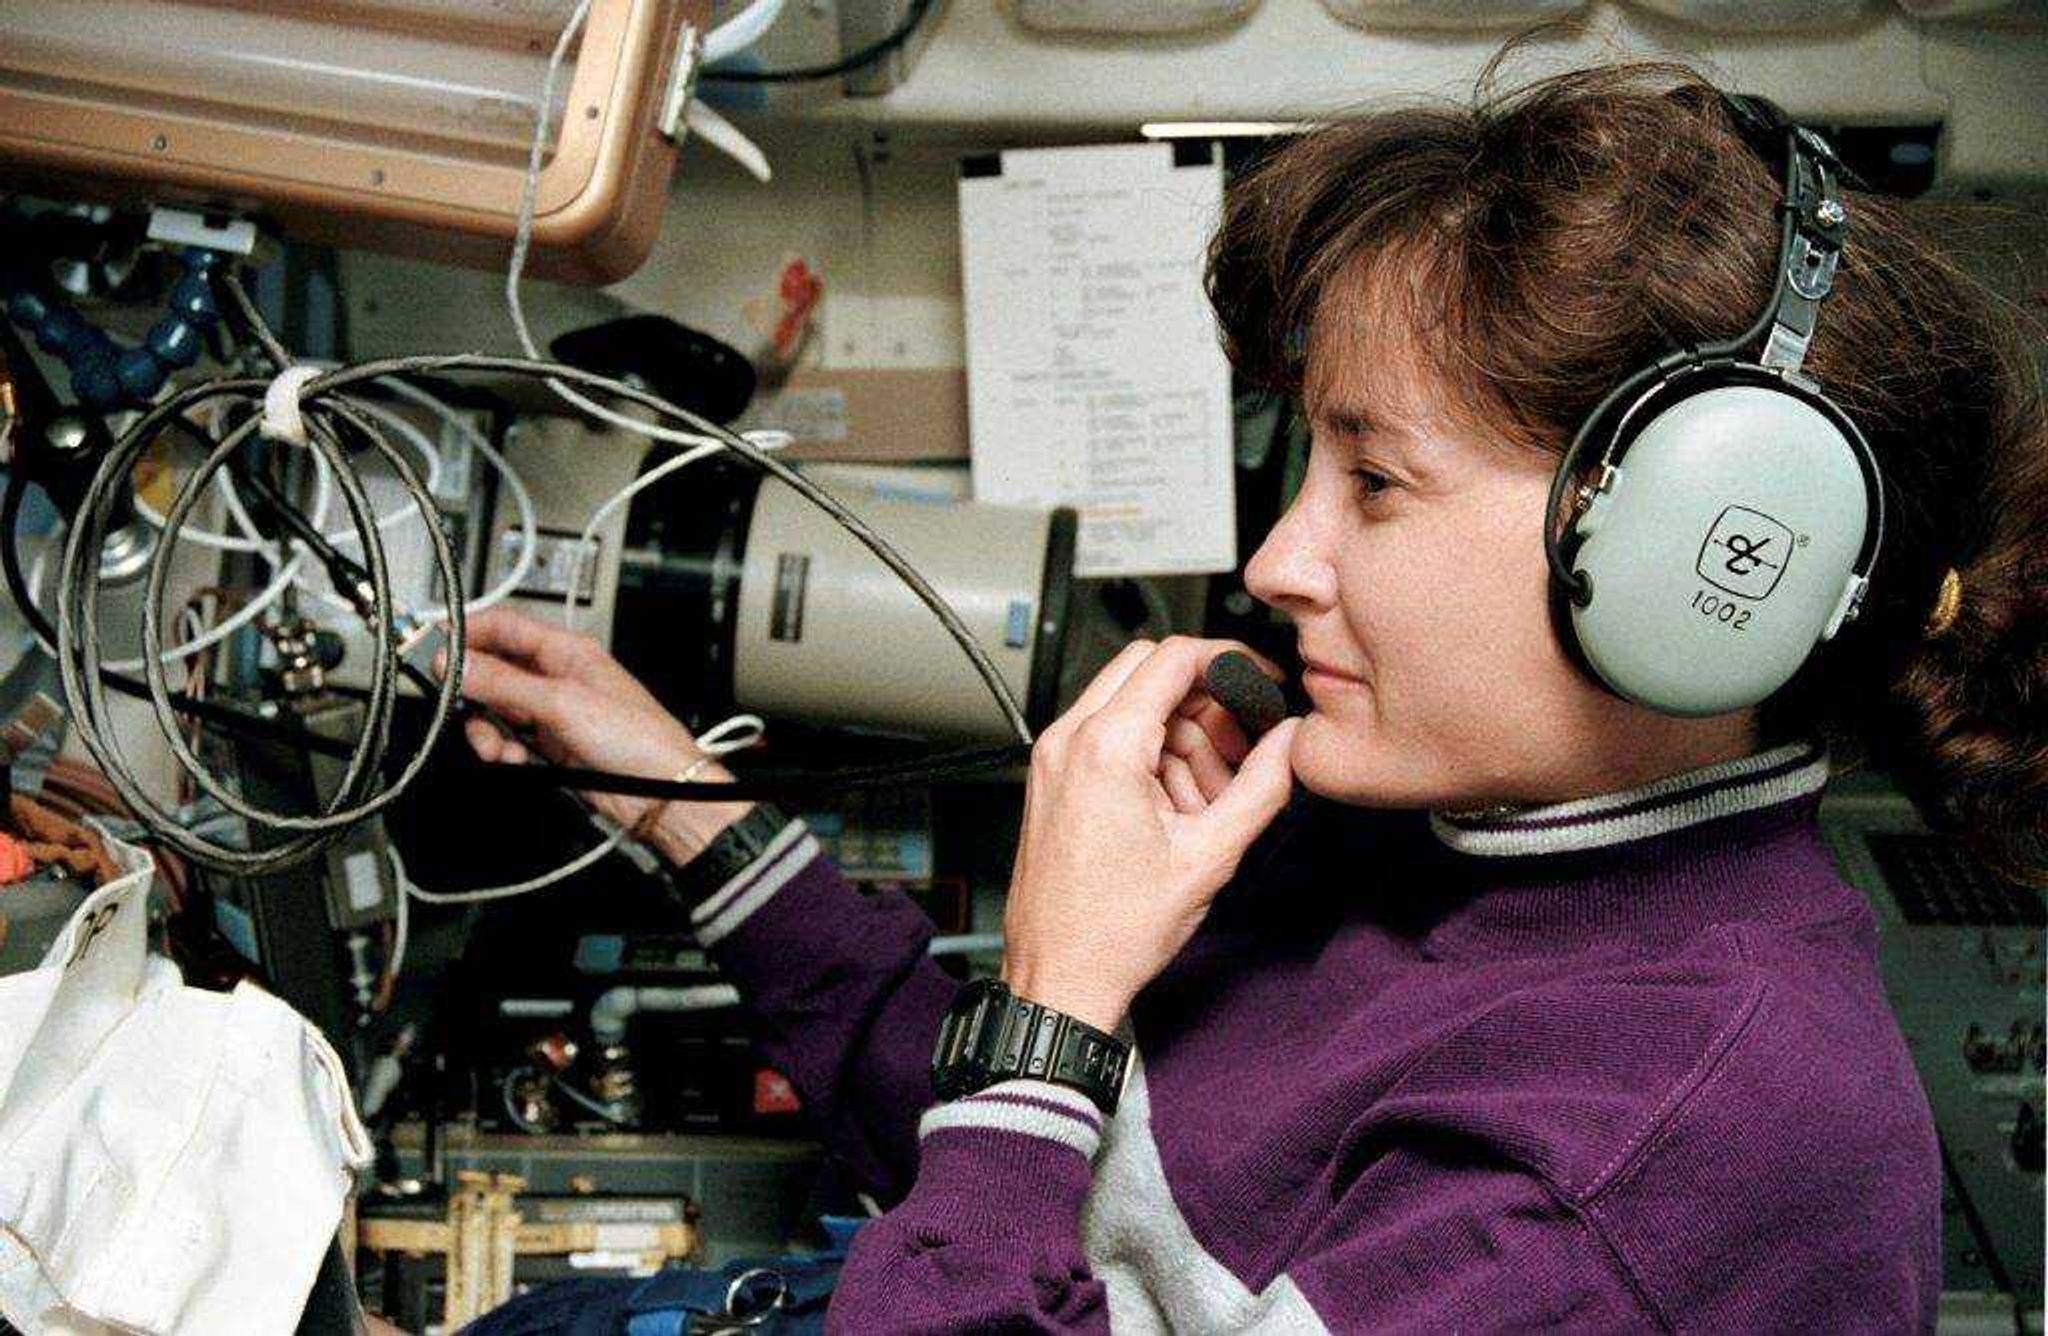 Linda Godwin as she uses Shuttle Amateur Radio Experiment, a radio that communicated with other amateur radios on Earth on space flight STS-59.